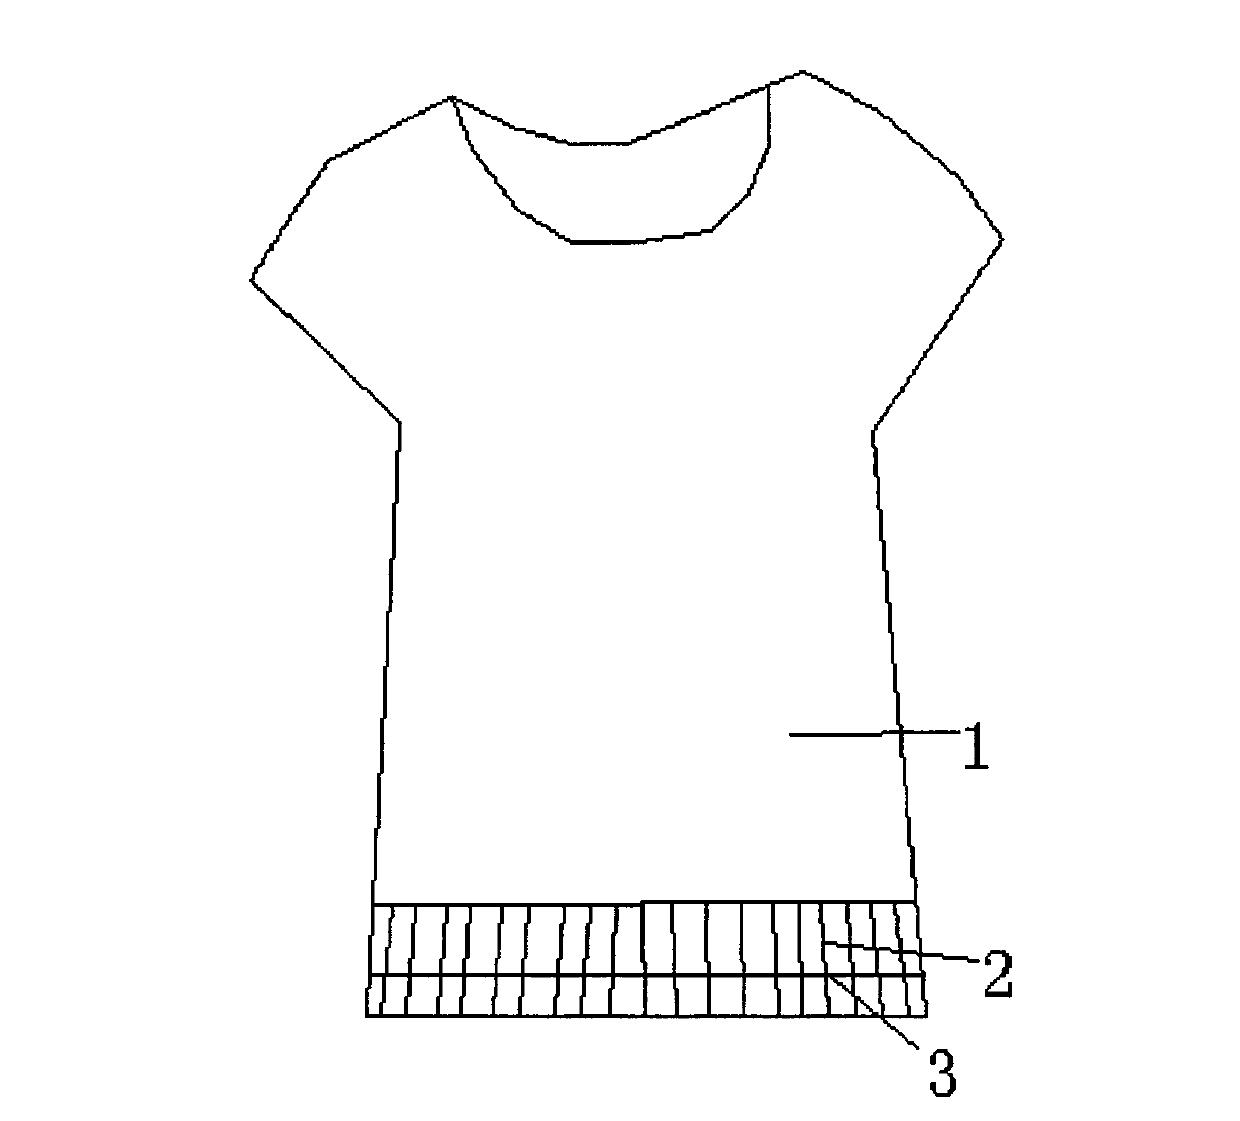 Radiation-proof and antimicrobial short sleeve shirt with rubber band and metal wire